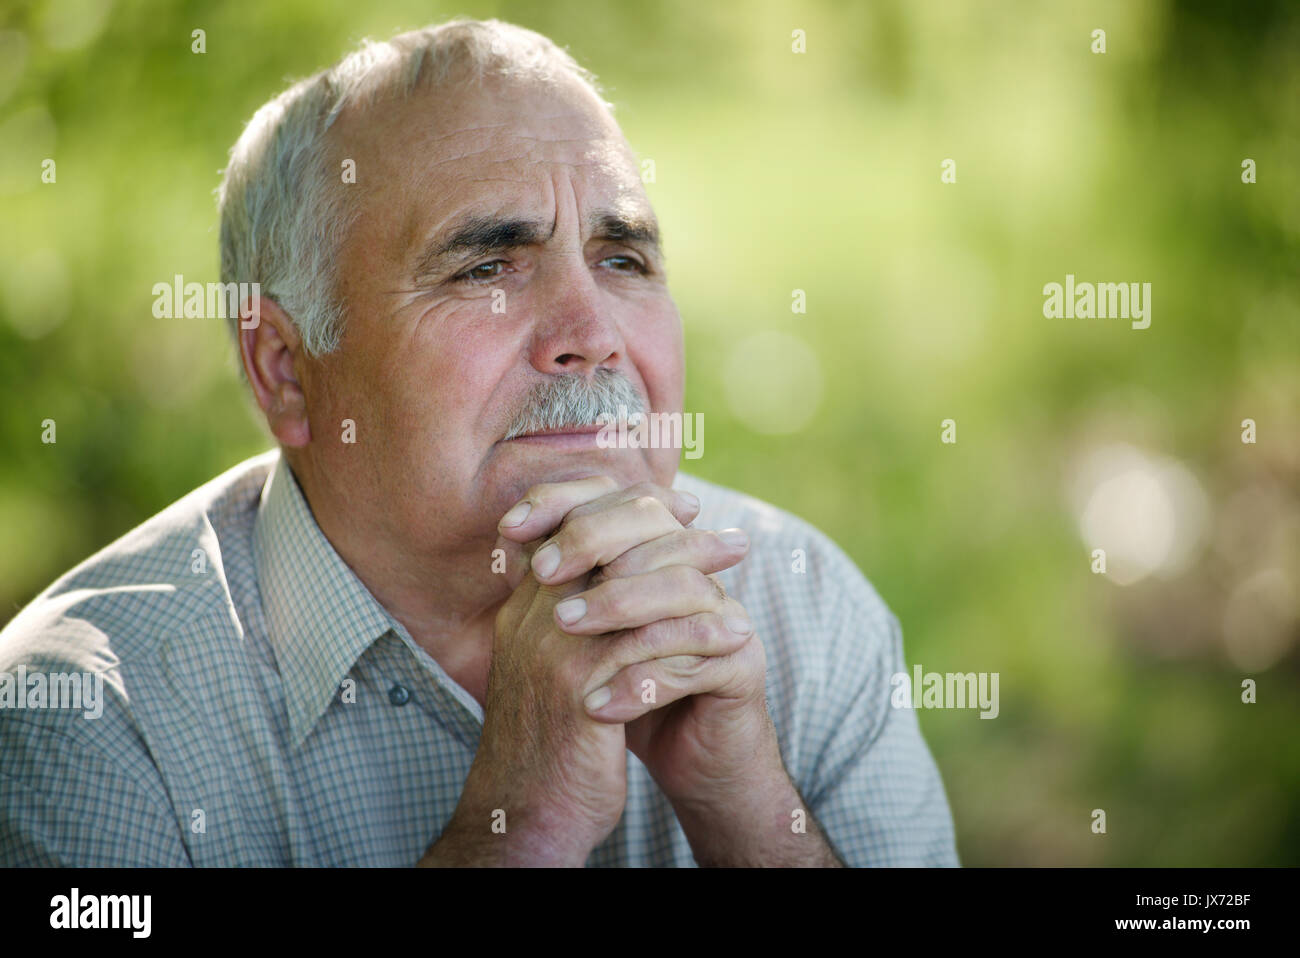 Elderly man sitting thinking in the garden with his chin resting on his hands as he stares into the distance with a pensive expression Stock Photo